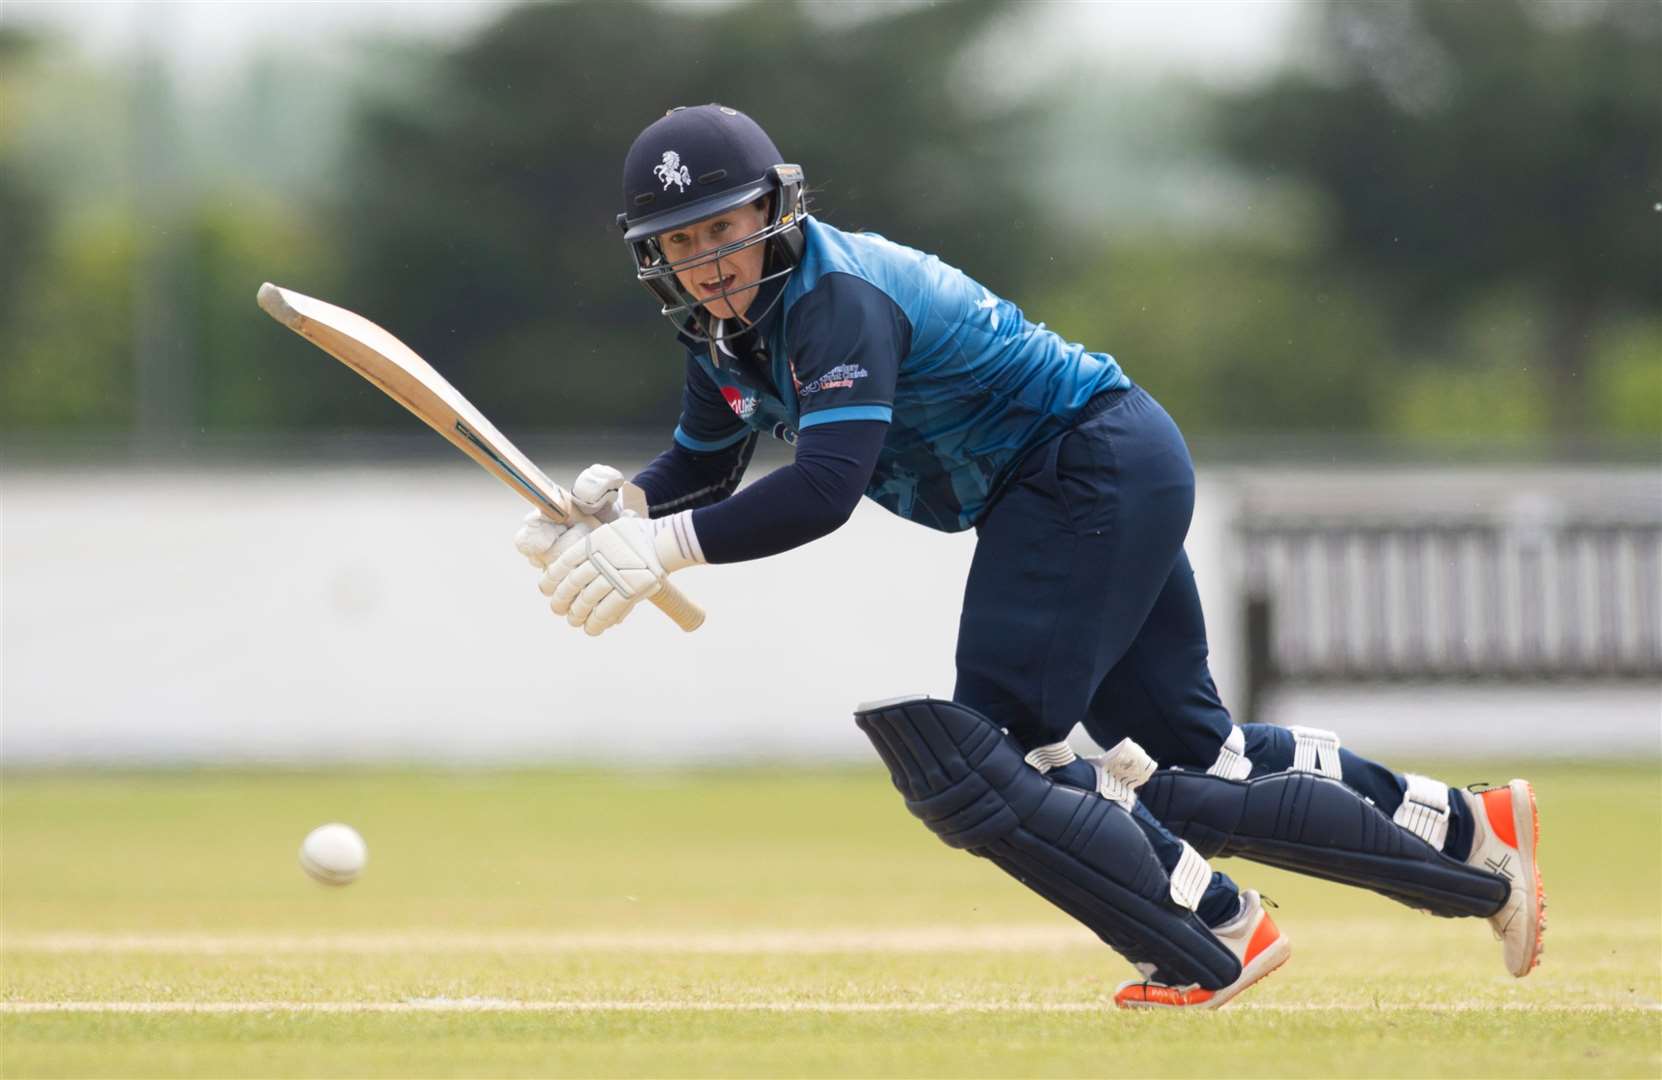 Kent's Tammy Beaumont will open the batting for England in Wellington. Picture: Ady Kerry